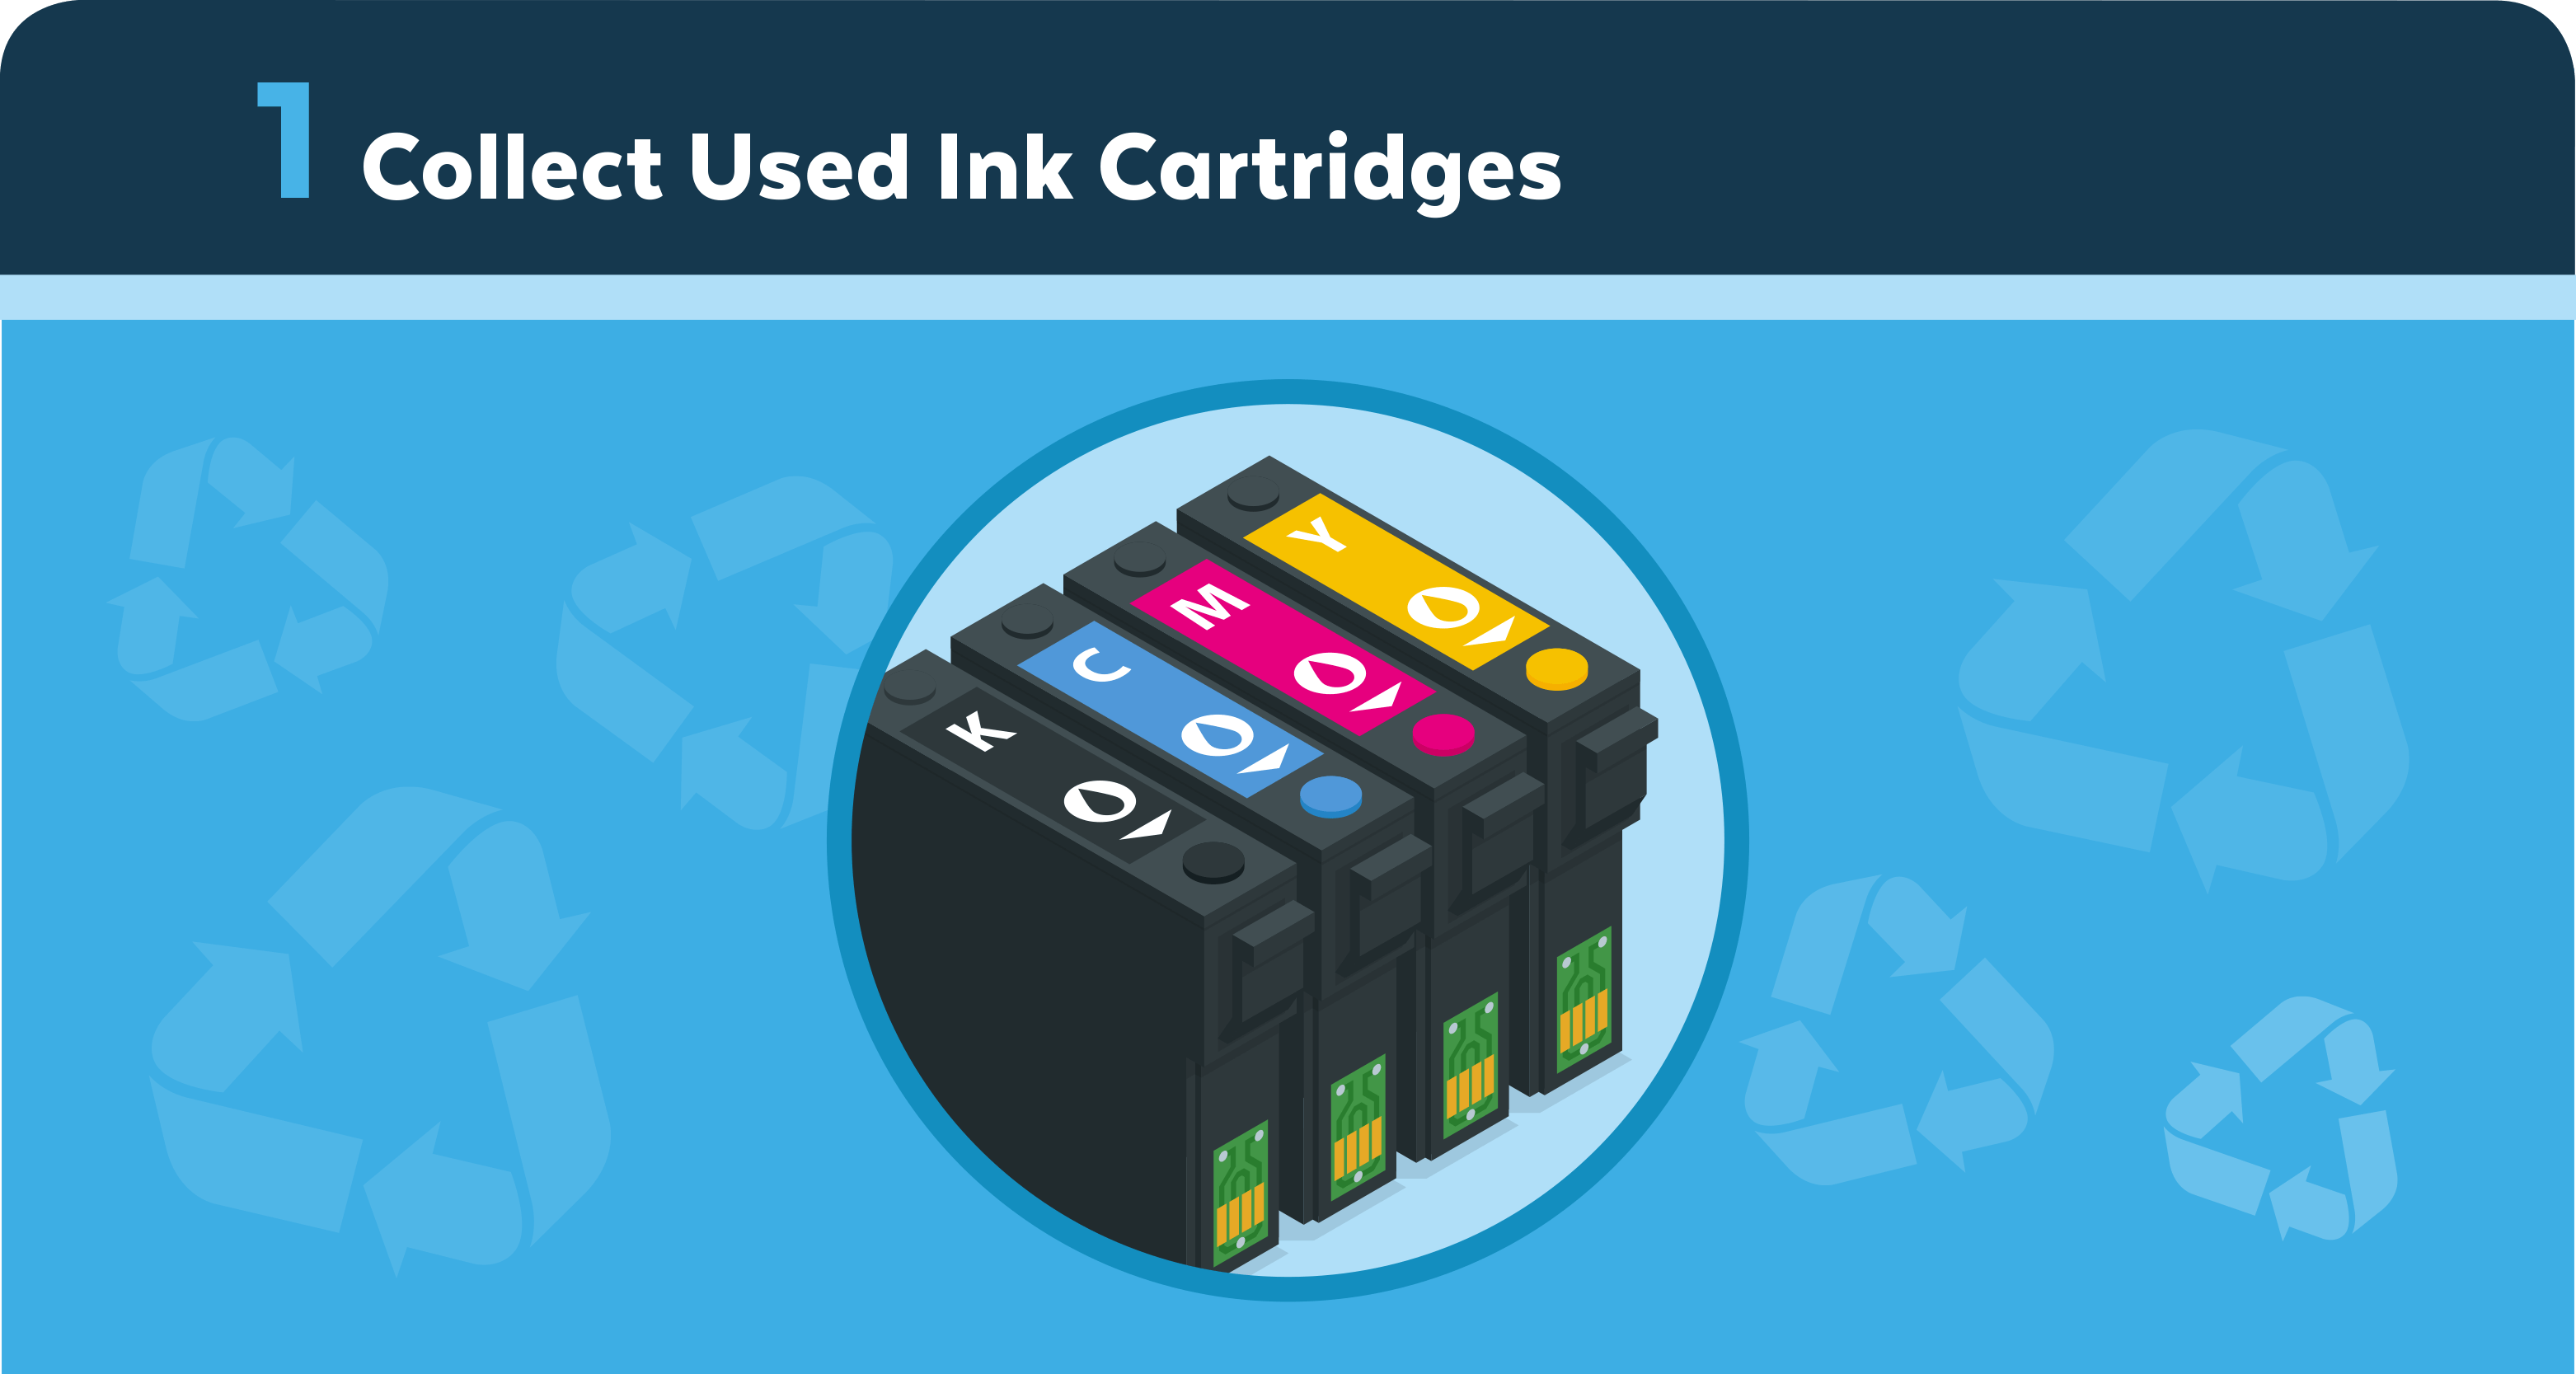 Collect Used Ink Cartridges